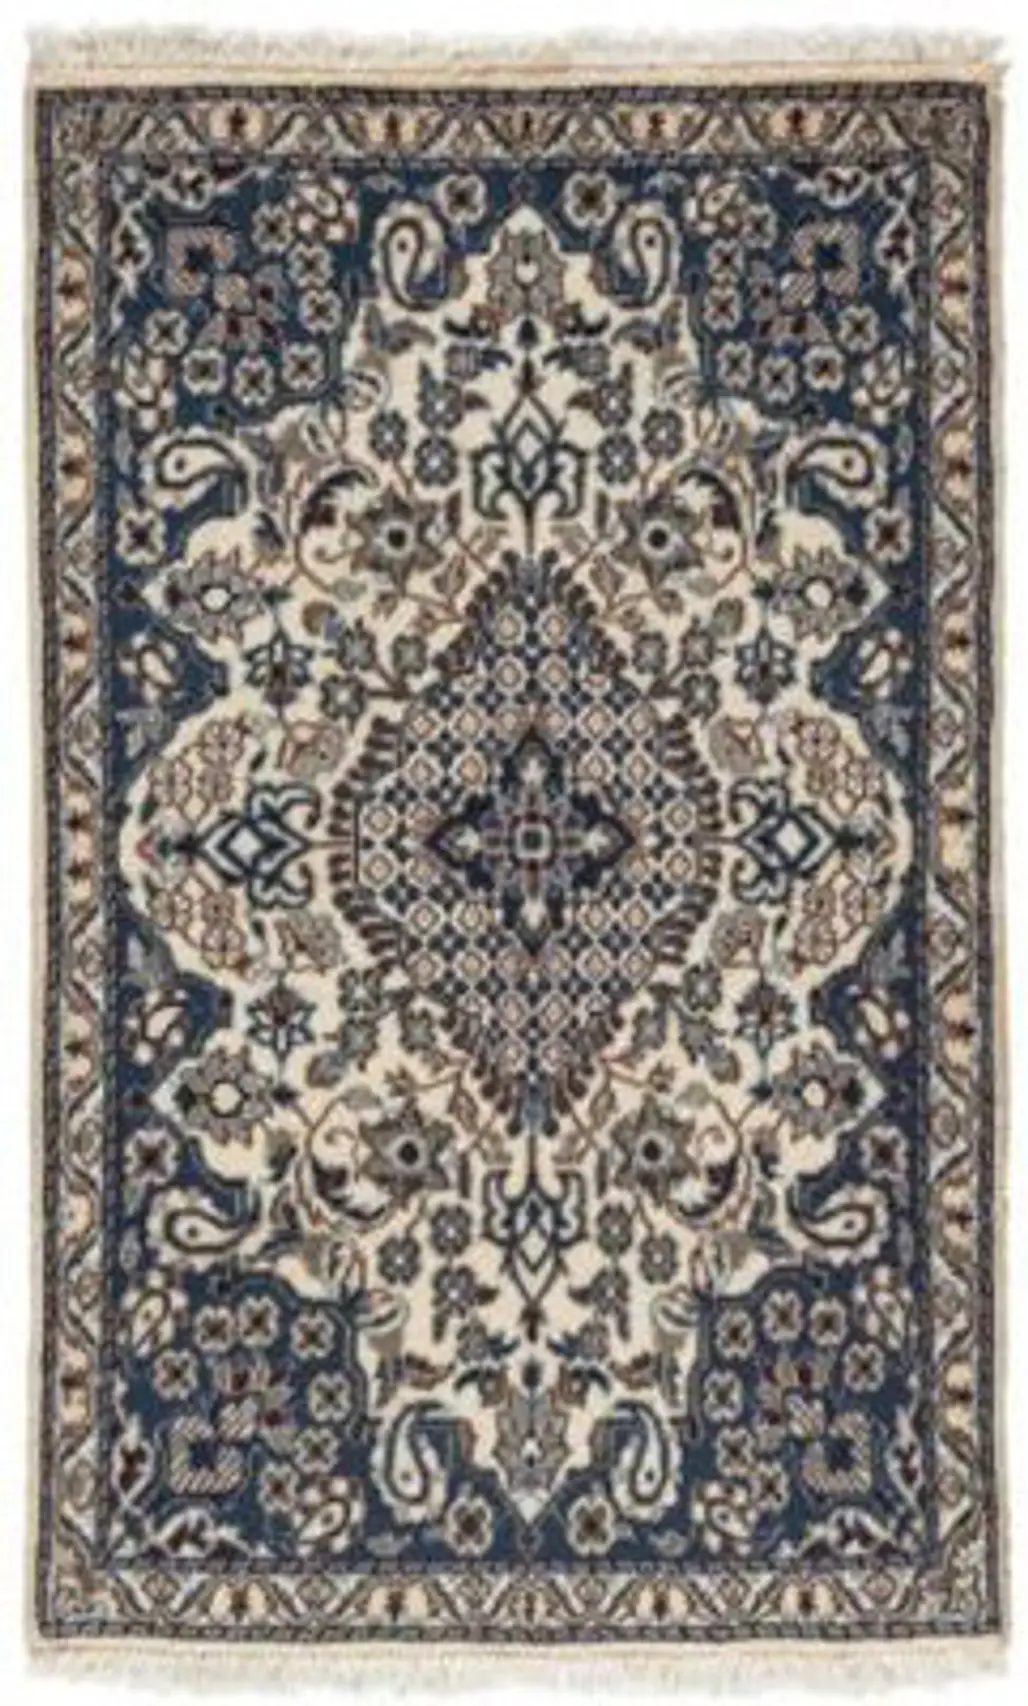 Persisk Low Pile Rug